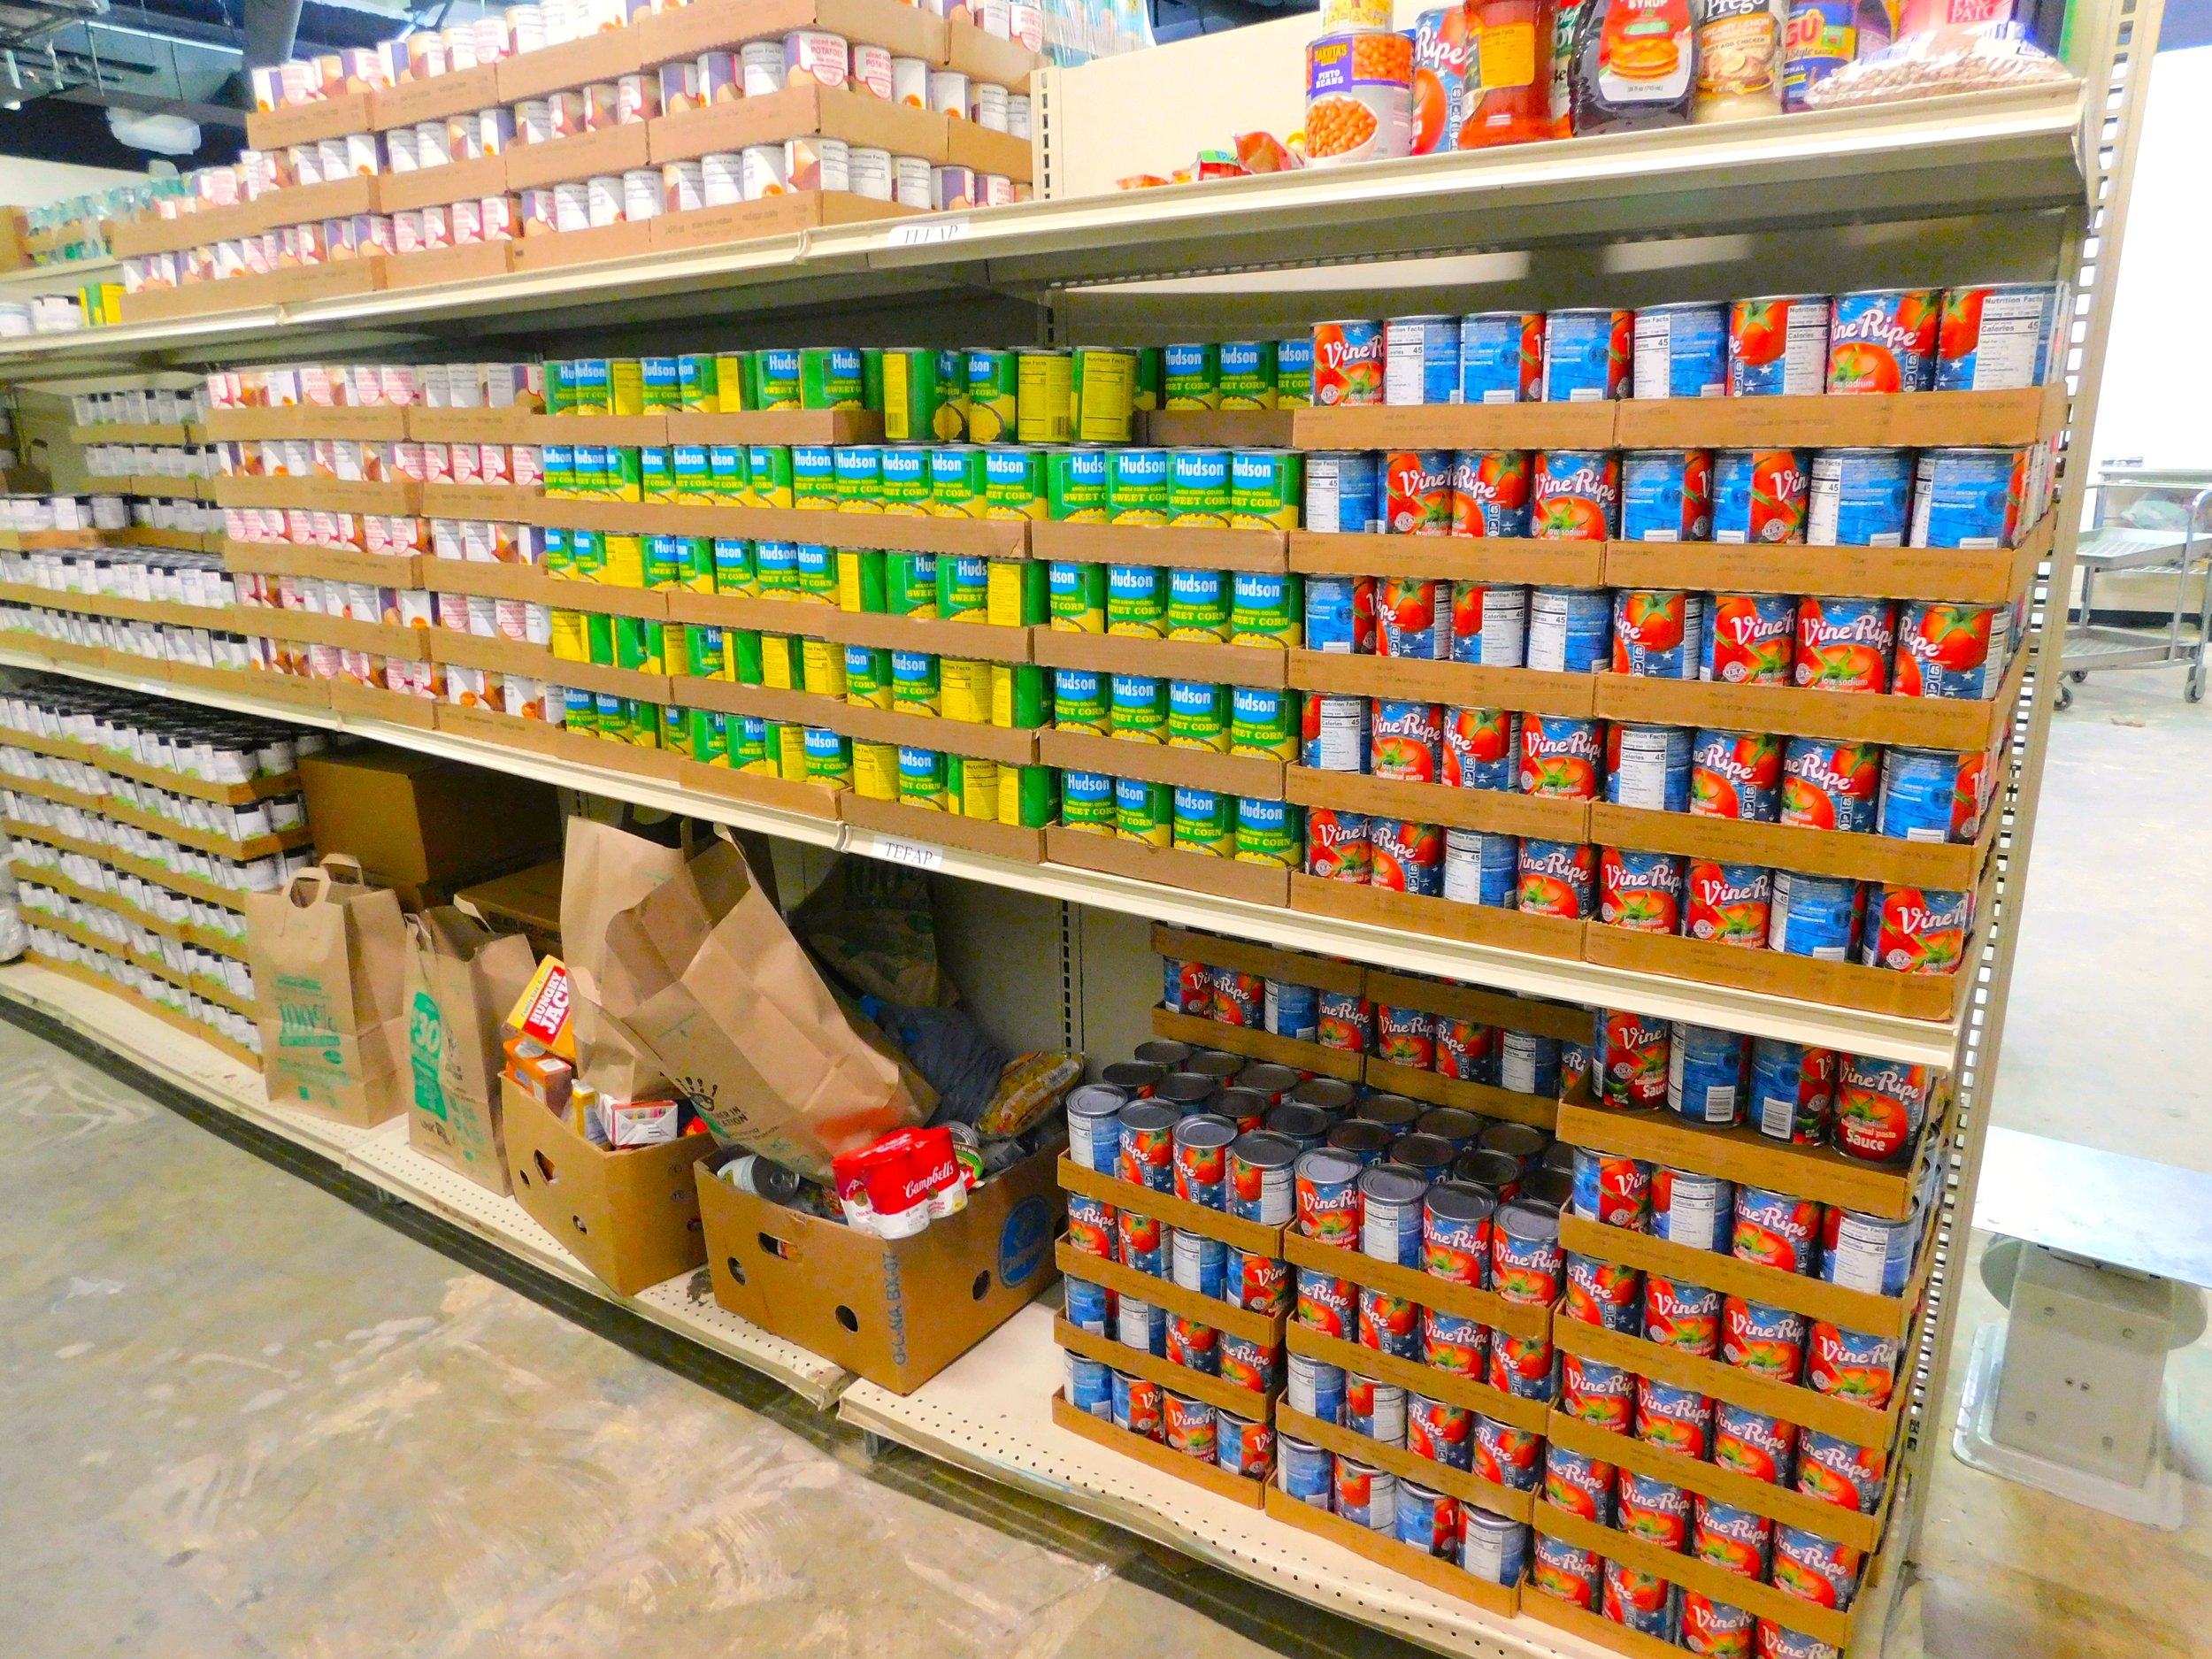 Care & Share food pantry